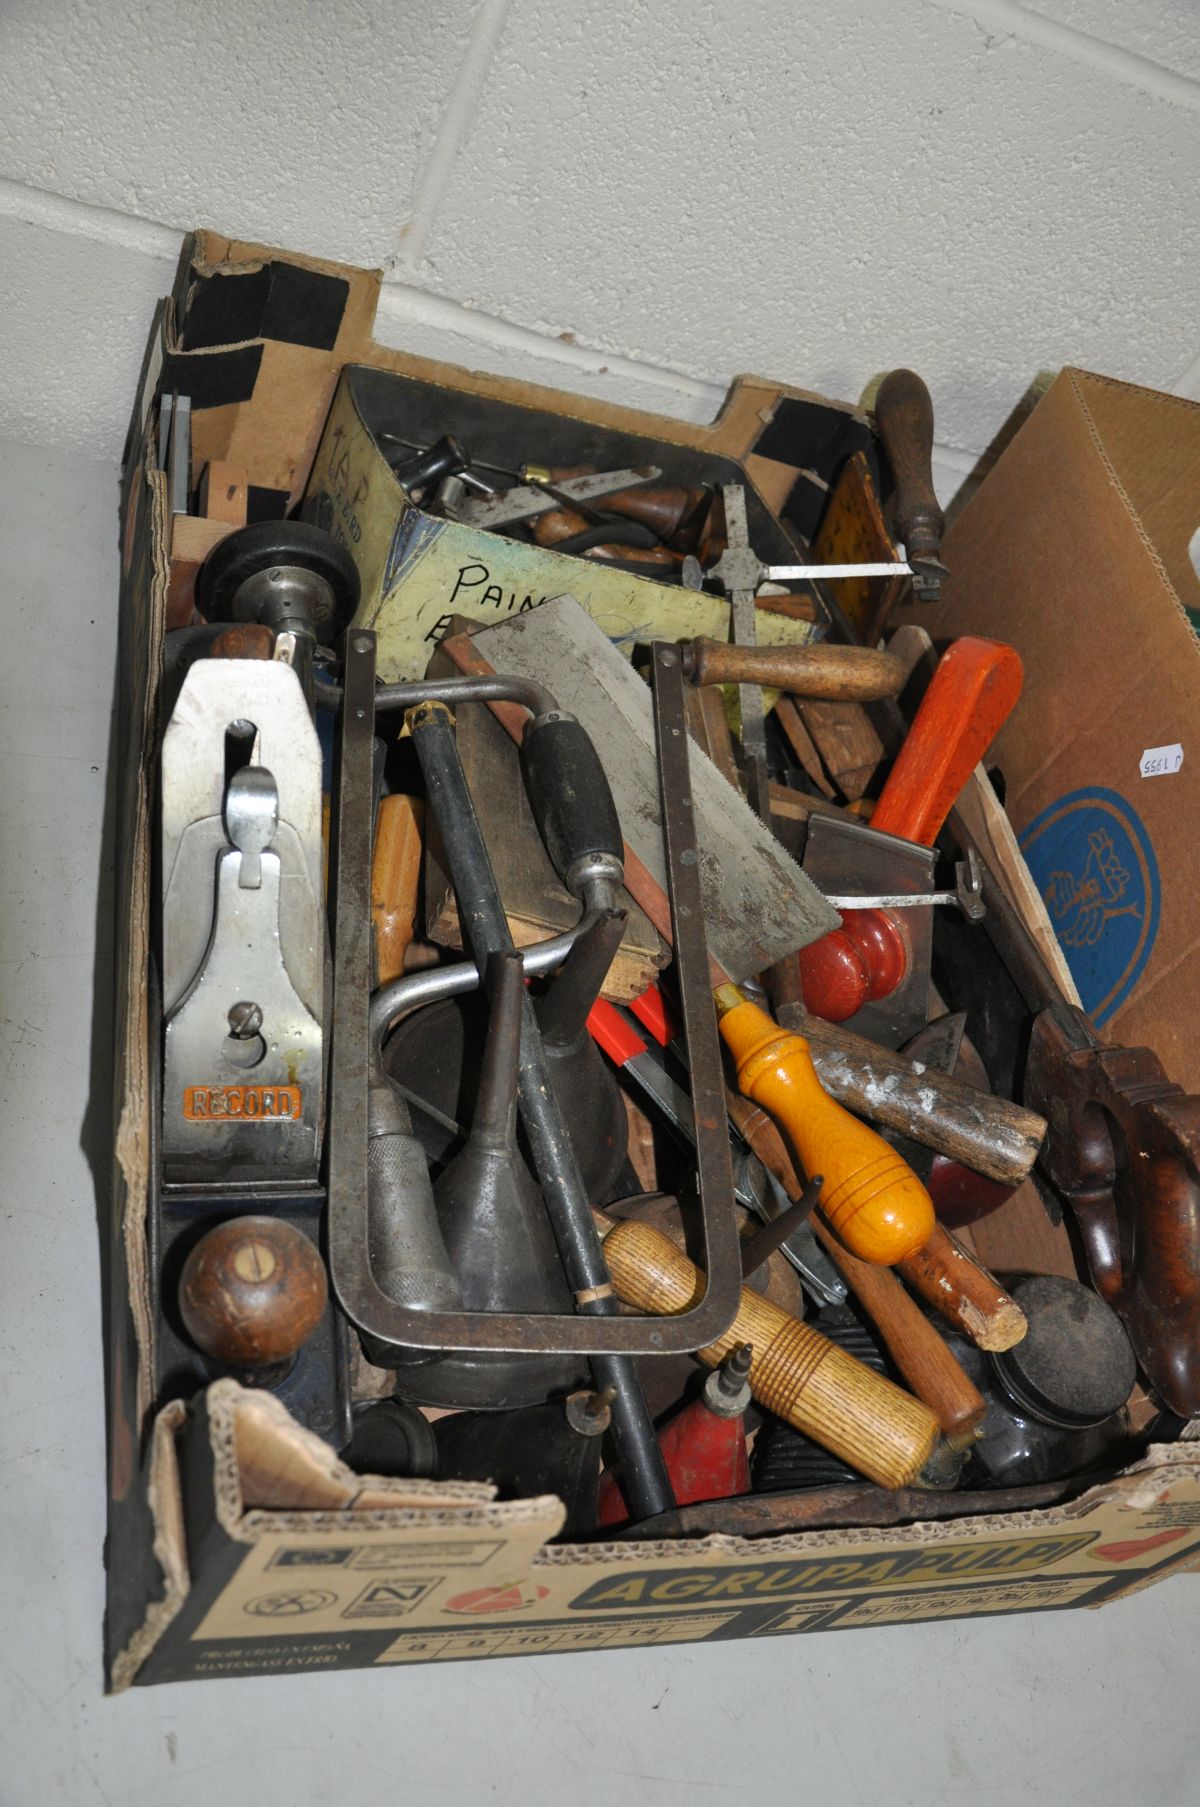 TWO TRAYS CONTAINING WOODWORKING TOOLS including a Record No 05 plane, chisels, awls, brace, saws, - Image 2 of 3